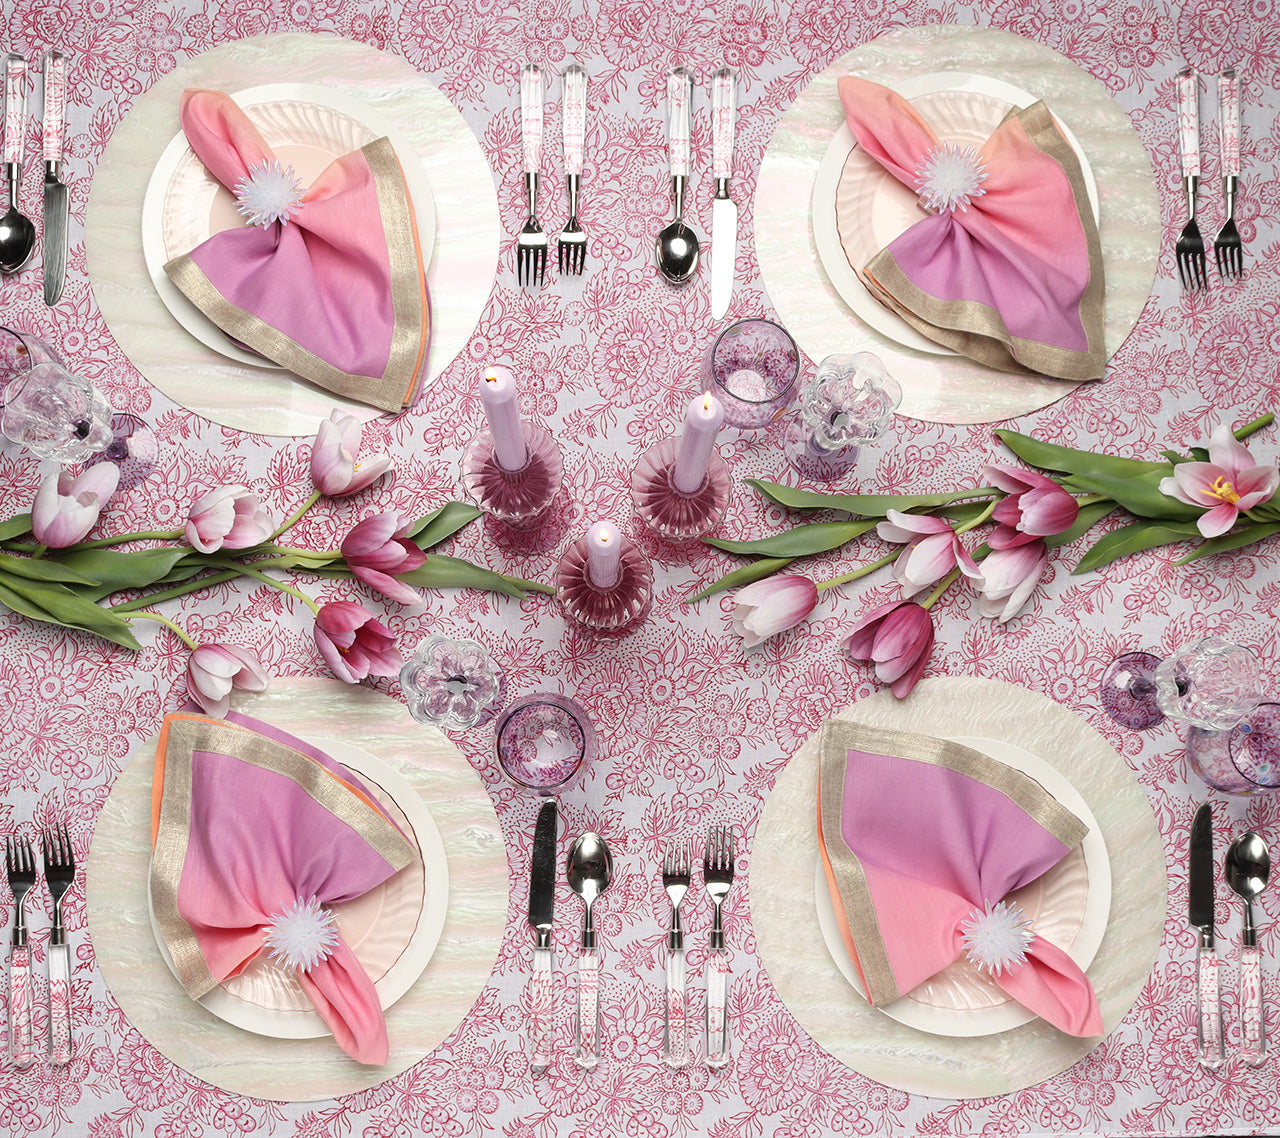 Overhead view of a table set with four place settings including Luxury Dip Dye Napkins in sorbet